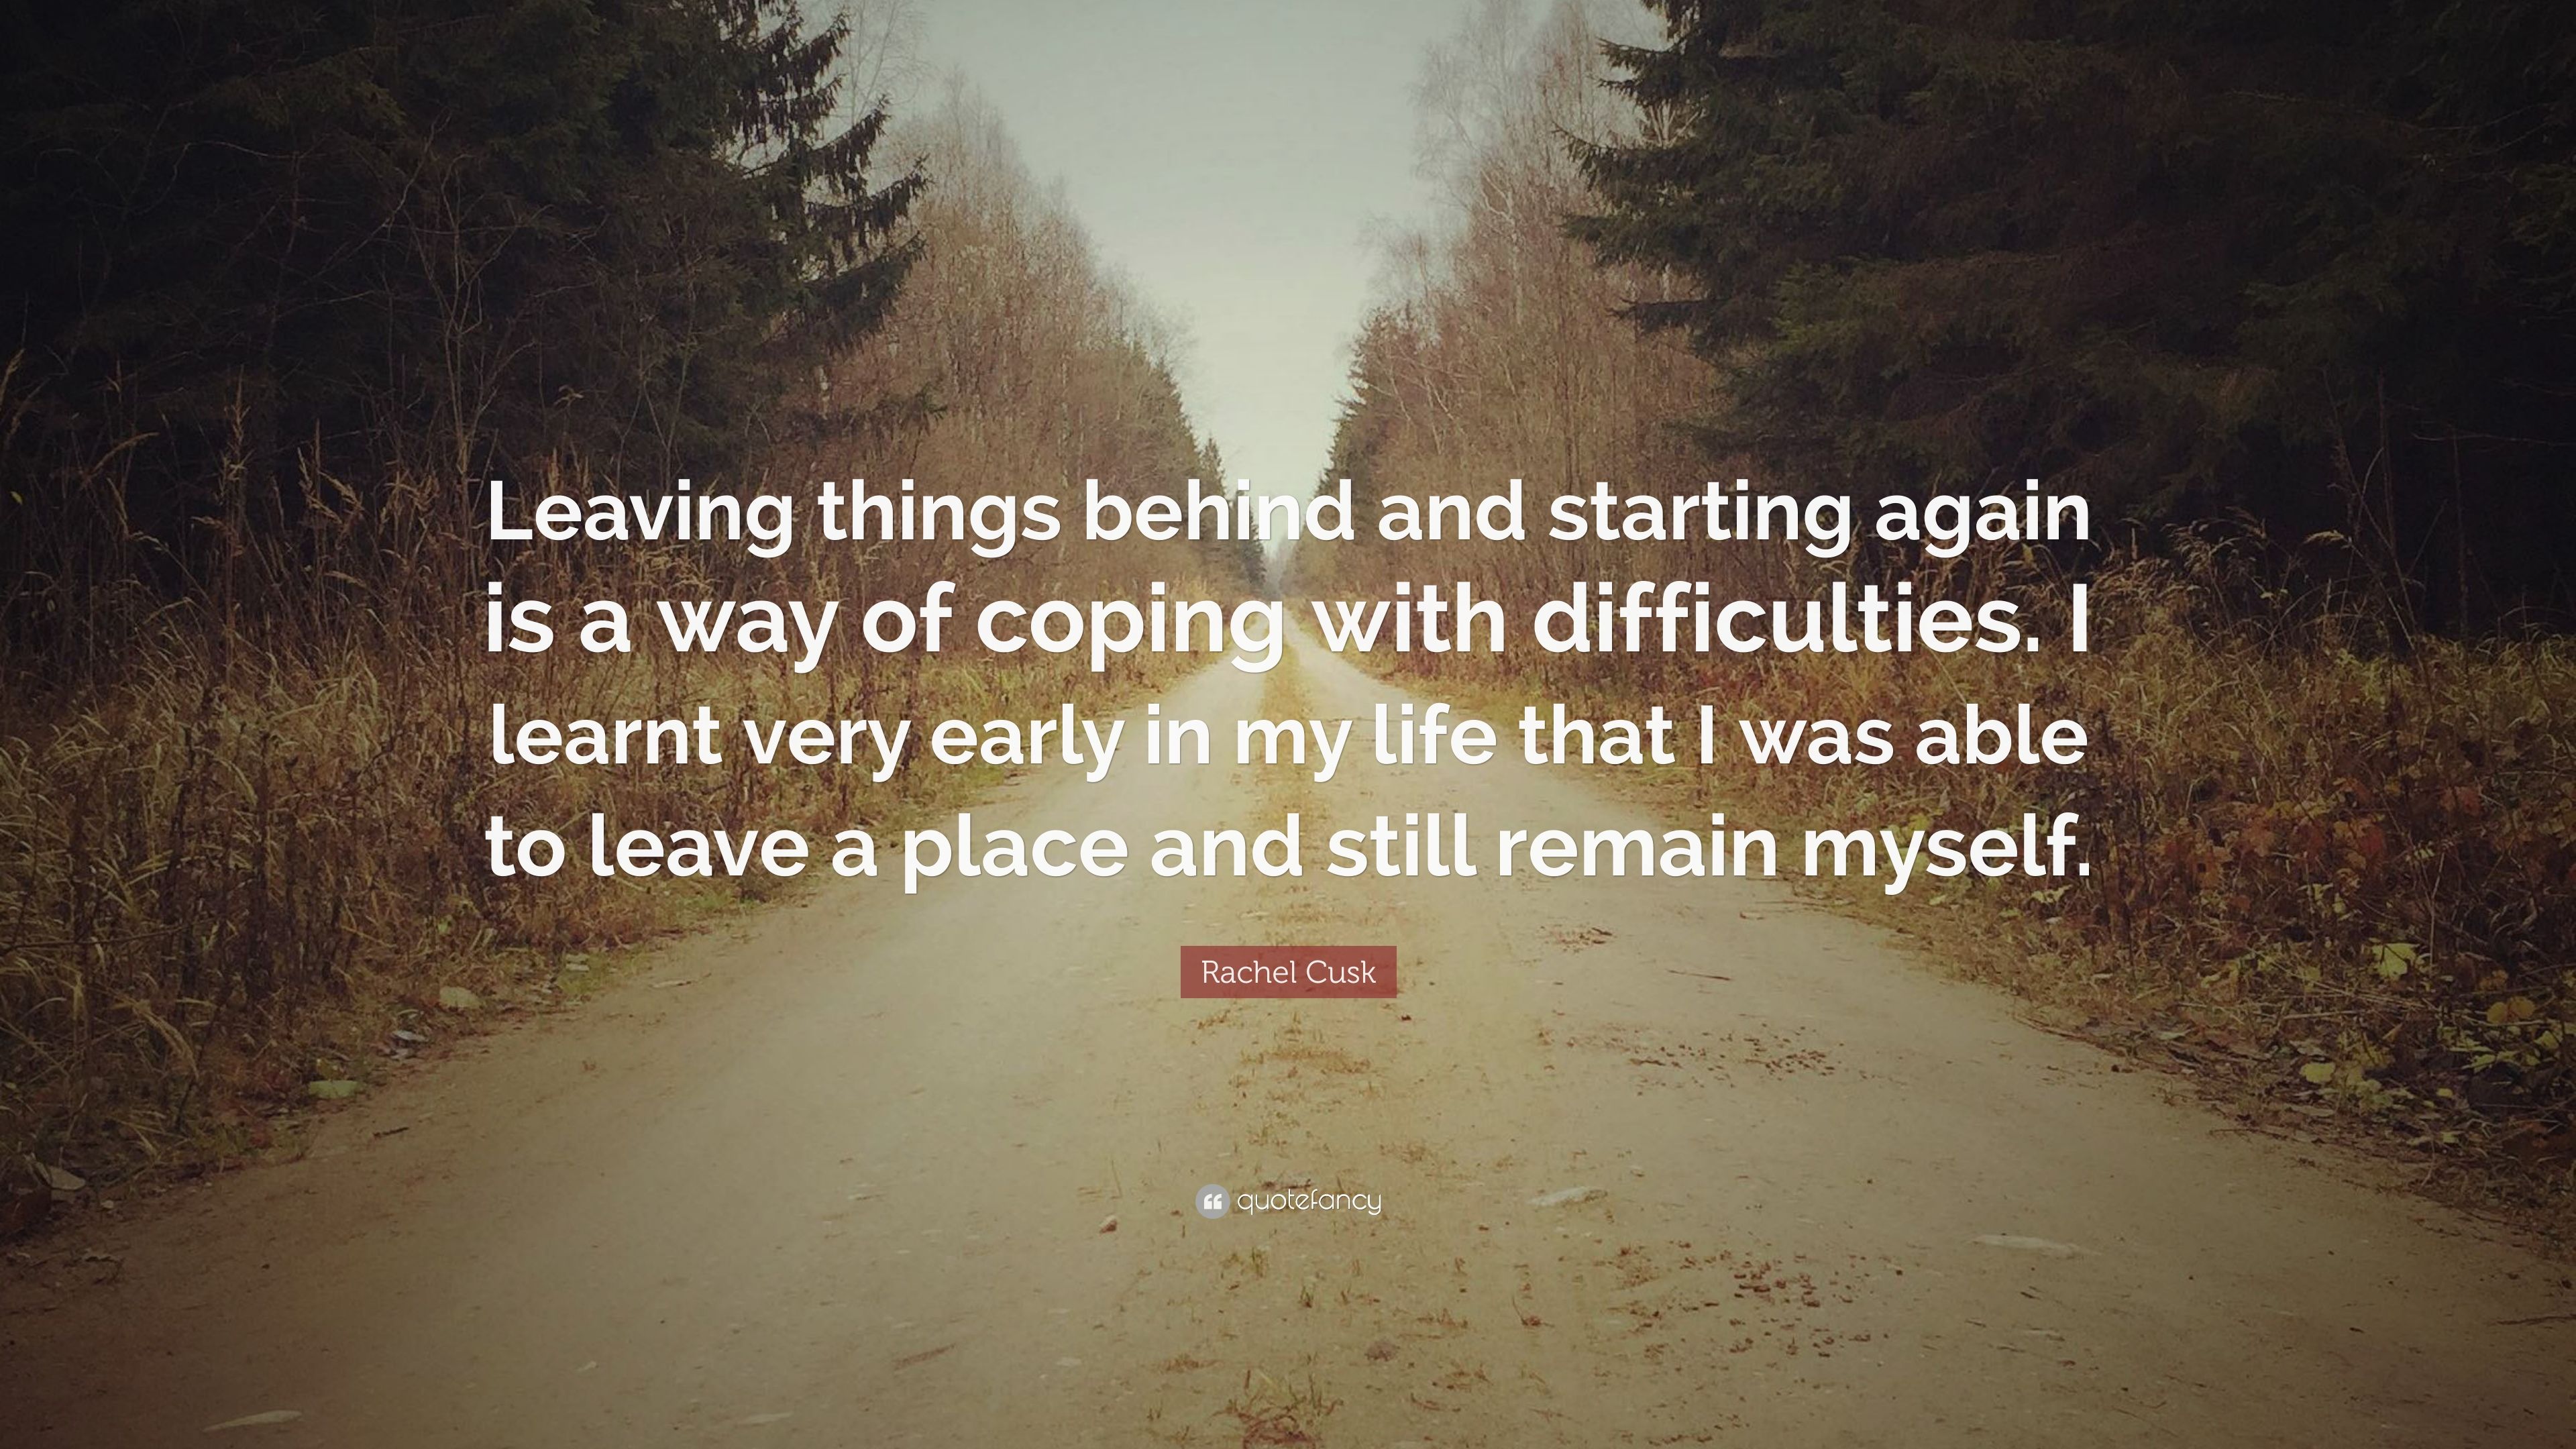 Rachel Cusk Quote: “Leaving things behind and starting again is a way of coping with difficulties. I learnt very early in my life that I was.” (7 wallpaper)